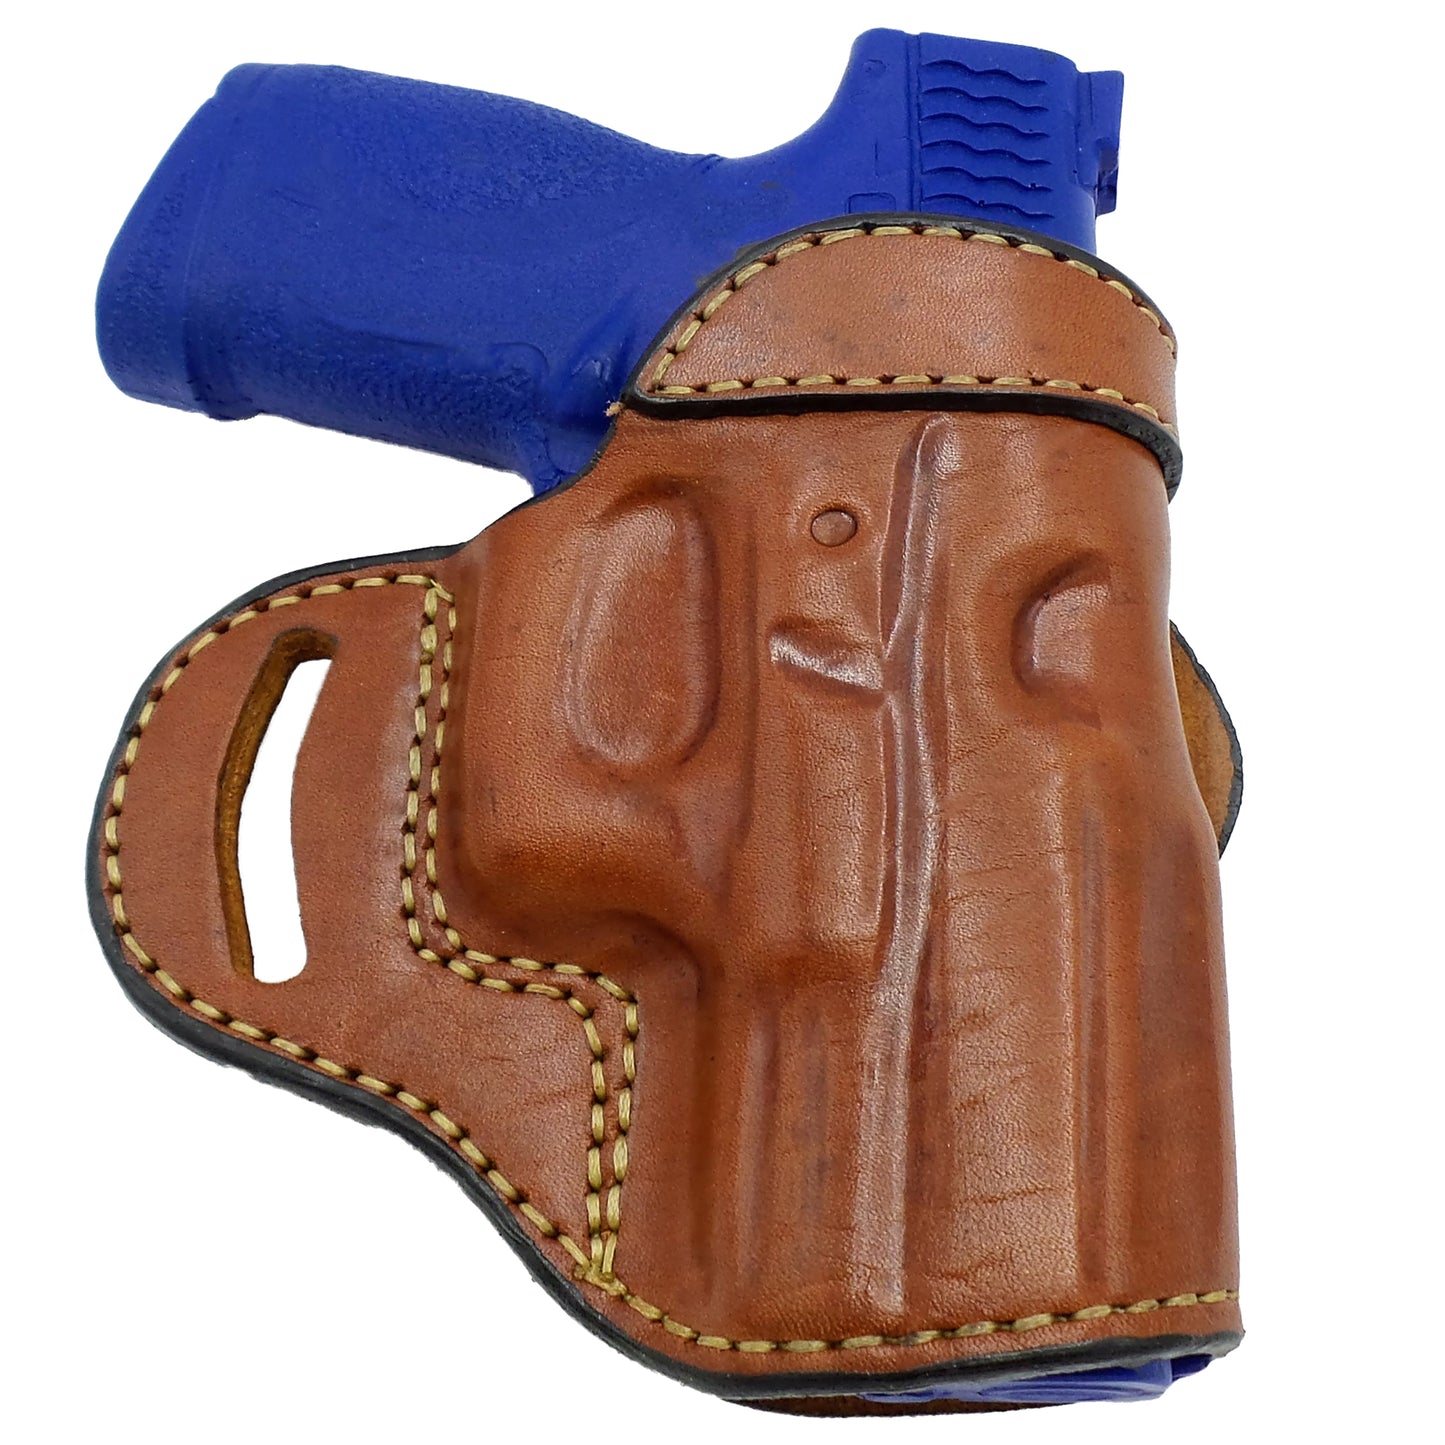 Beretta PX4 Storm Subcompact 9mm / 40 S&W OWB Open Top Leather CROSS DRAW Holster